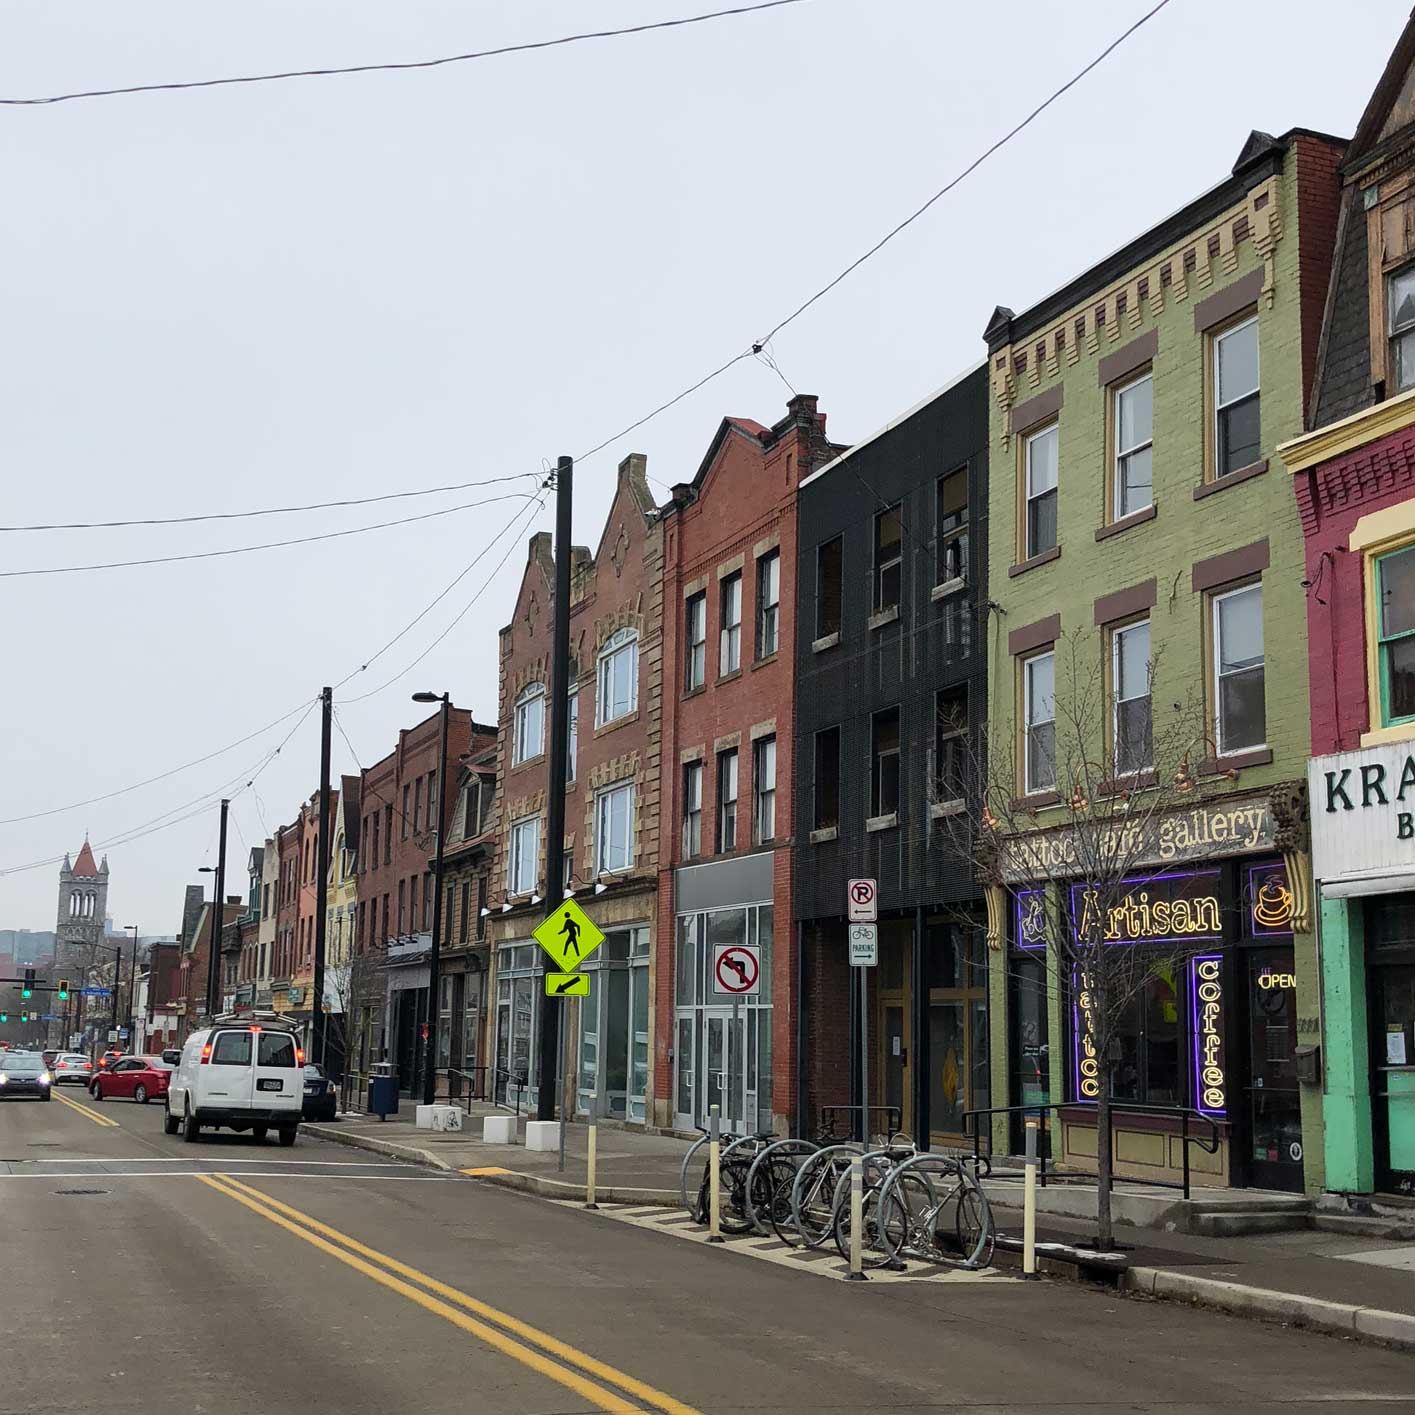 An image of a grey sky and quaint buildings on Penn Ave. in Pittsurgh